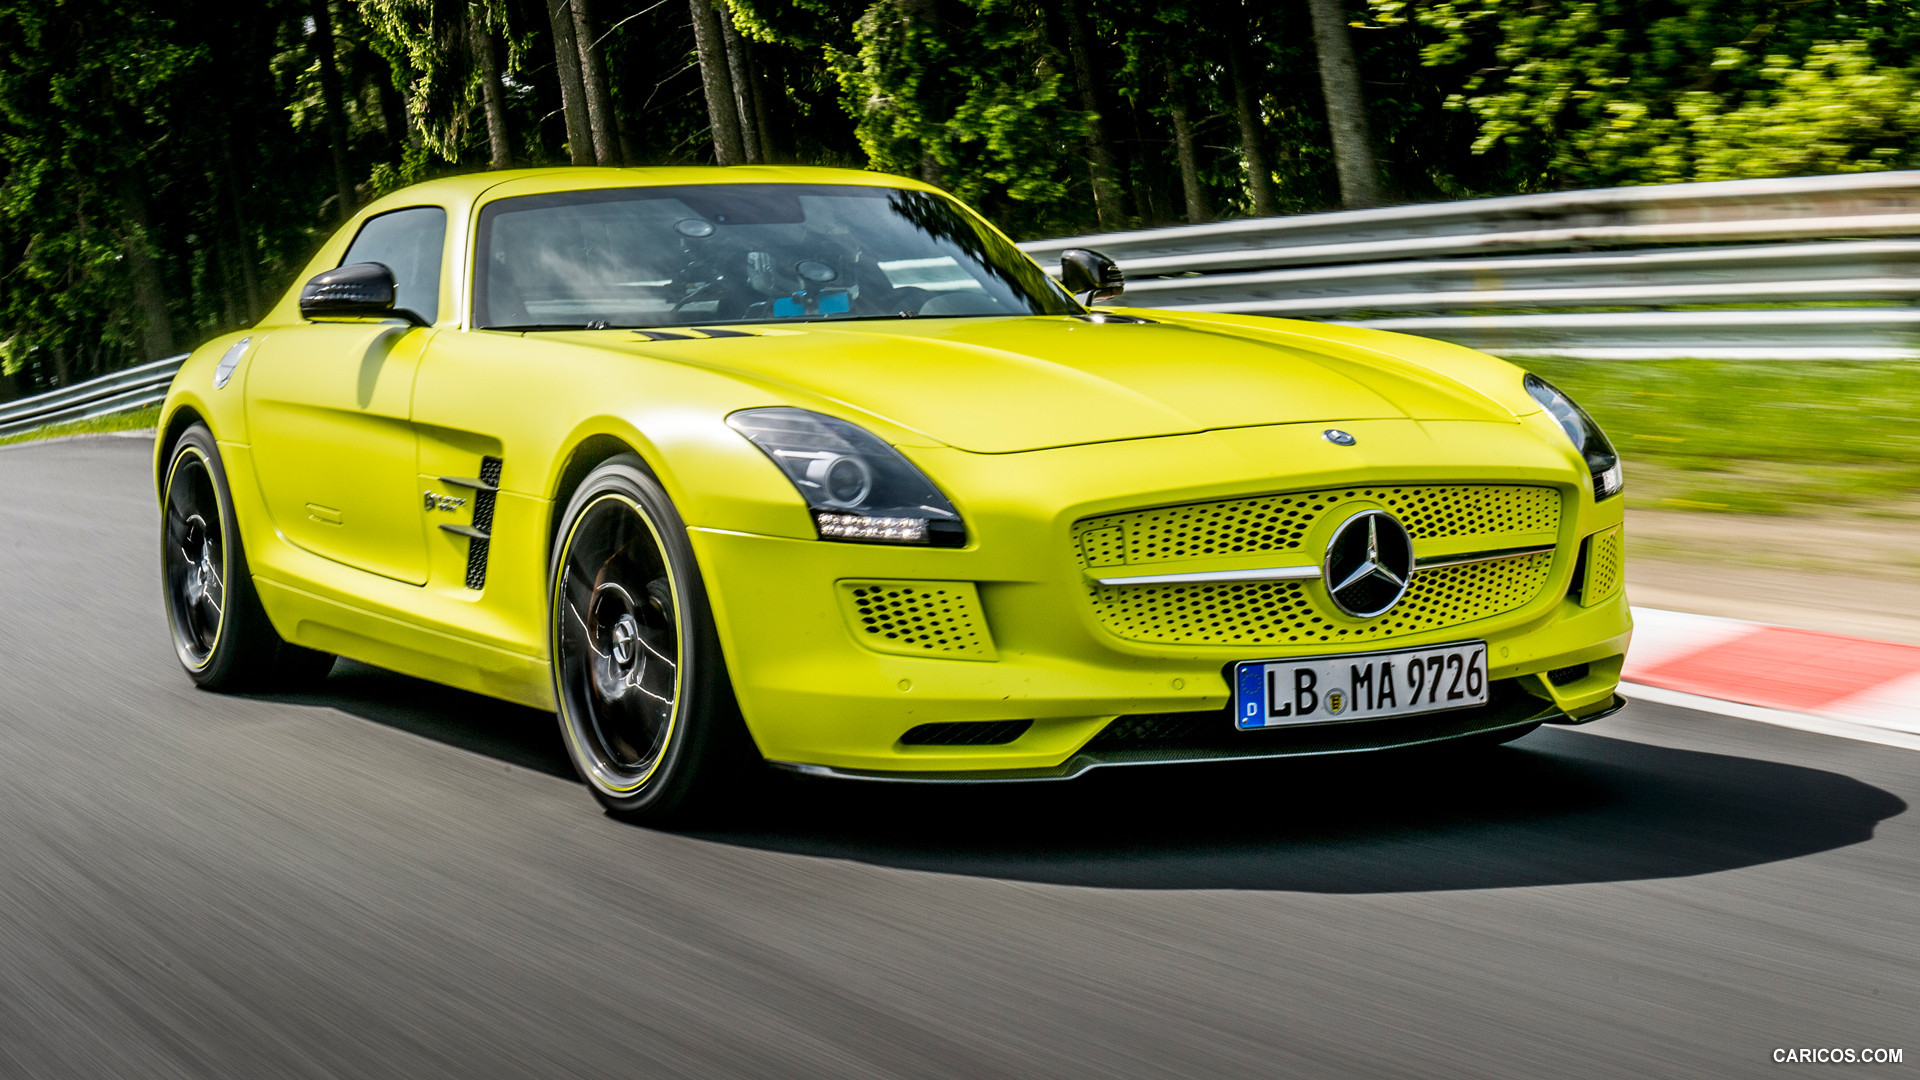 2014 Mercedes-Benz SLS AMG Coupe Electric Drive, Yellow at Nürburgring   - Front, #44 of 47